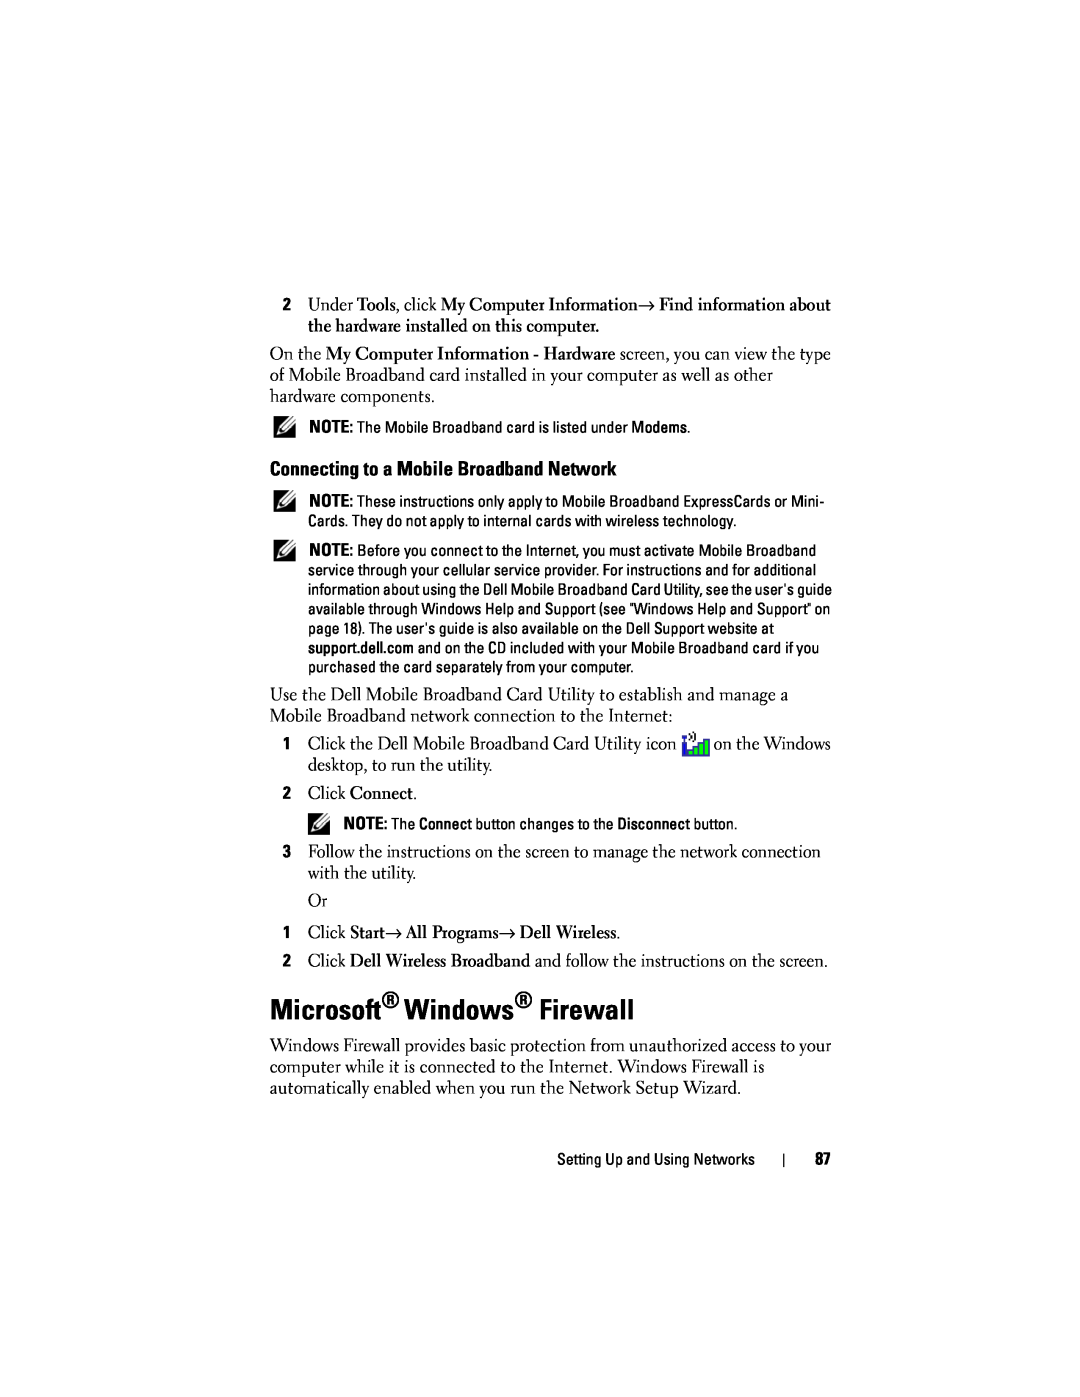 Dell D530 manual Microsoft Windows Firewall, Connecting to a Mobile Broadband Network 